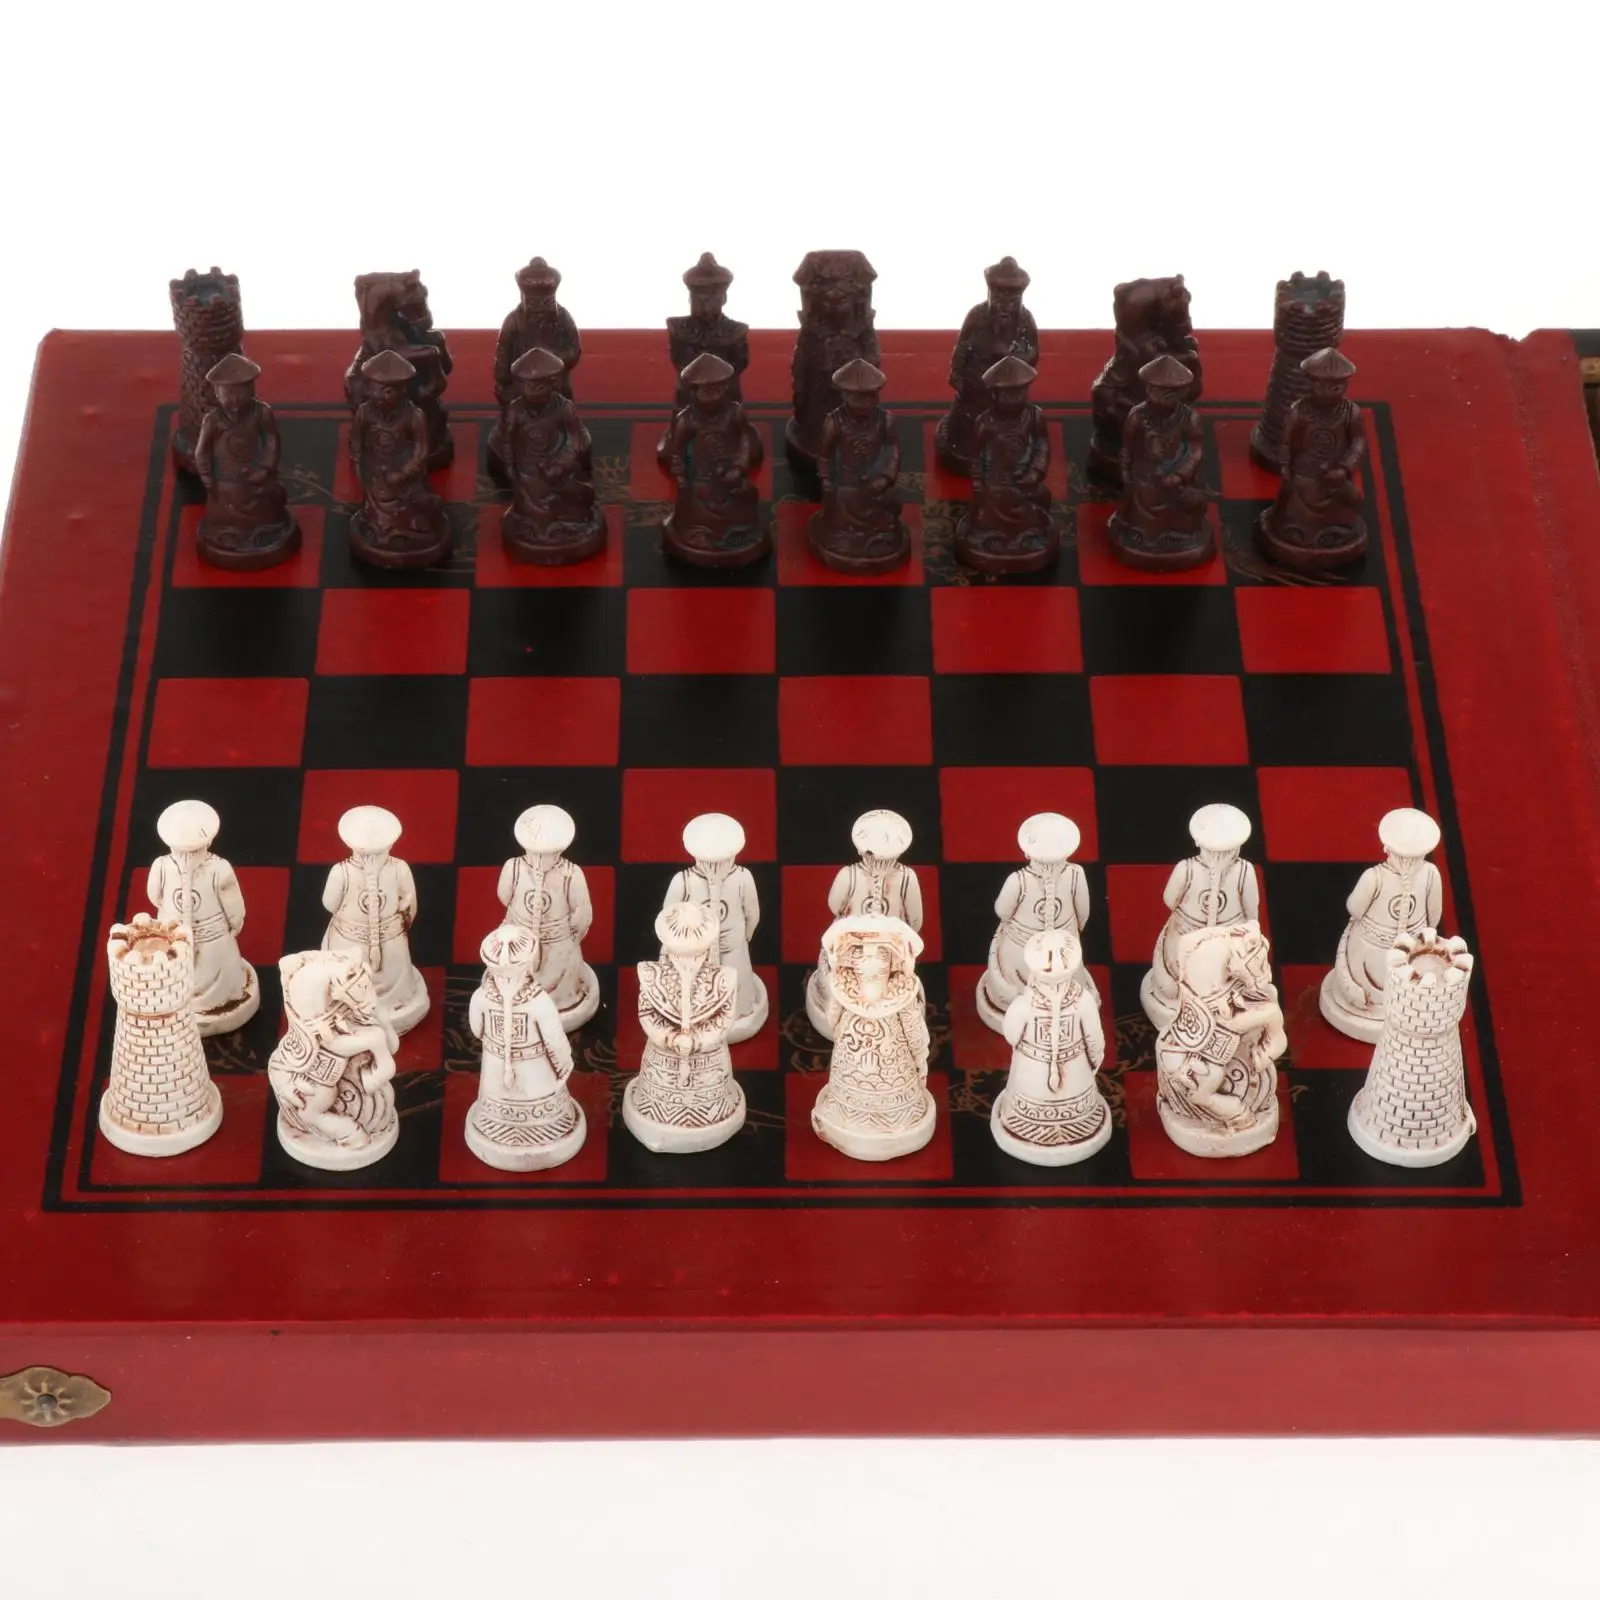 Foldable Handmade Wooden Chess Set with Storage Board Game Toy for Adults